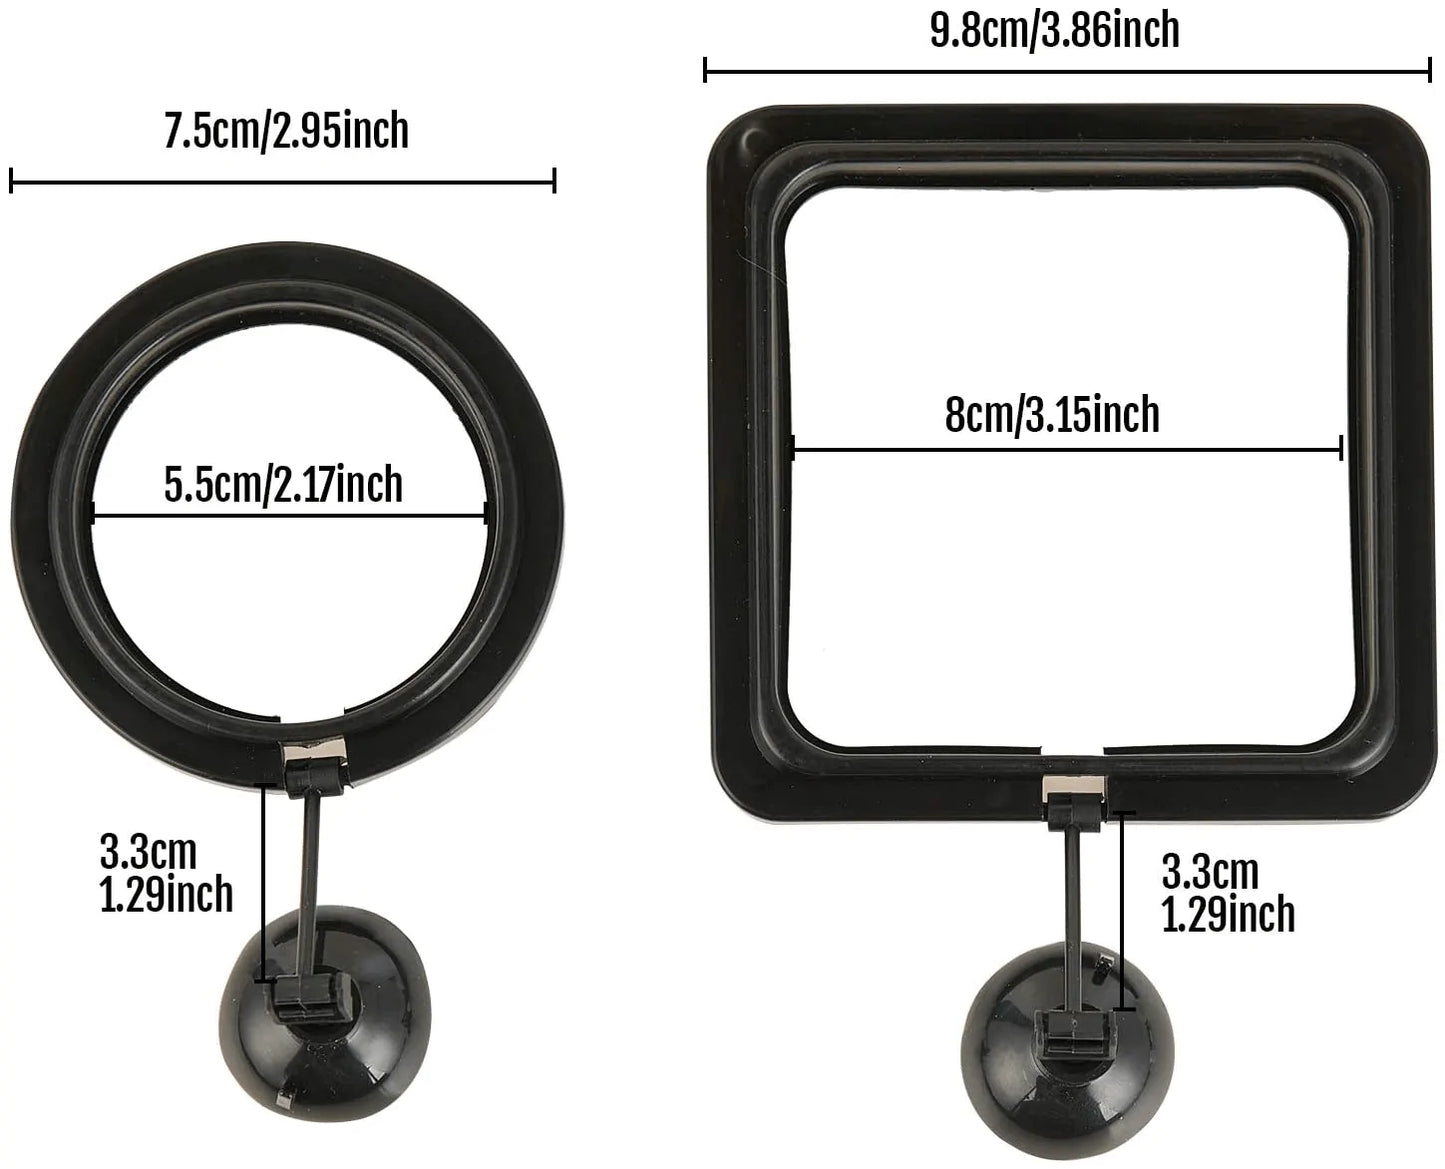 ZRDR Fish Feeding Ring, 2 Pack Black Aquarium Floating Food Feeder Circle Small round and Square with Flexible Lever Suitable and Suction Cup, Reduces Fish Feeder Waste and Maintains Water Quality